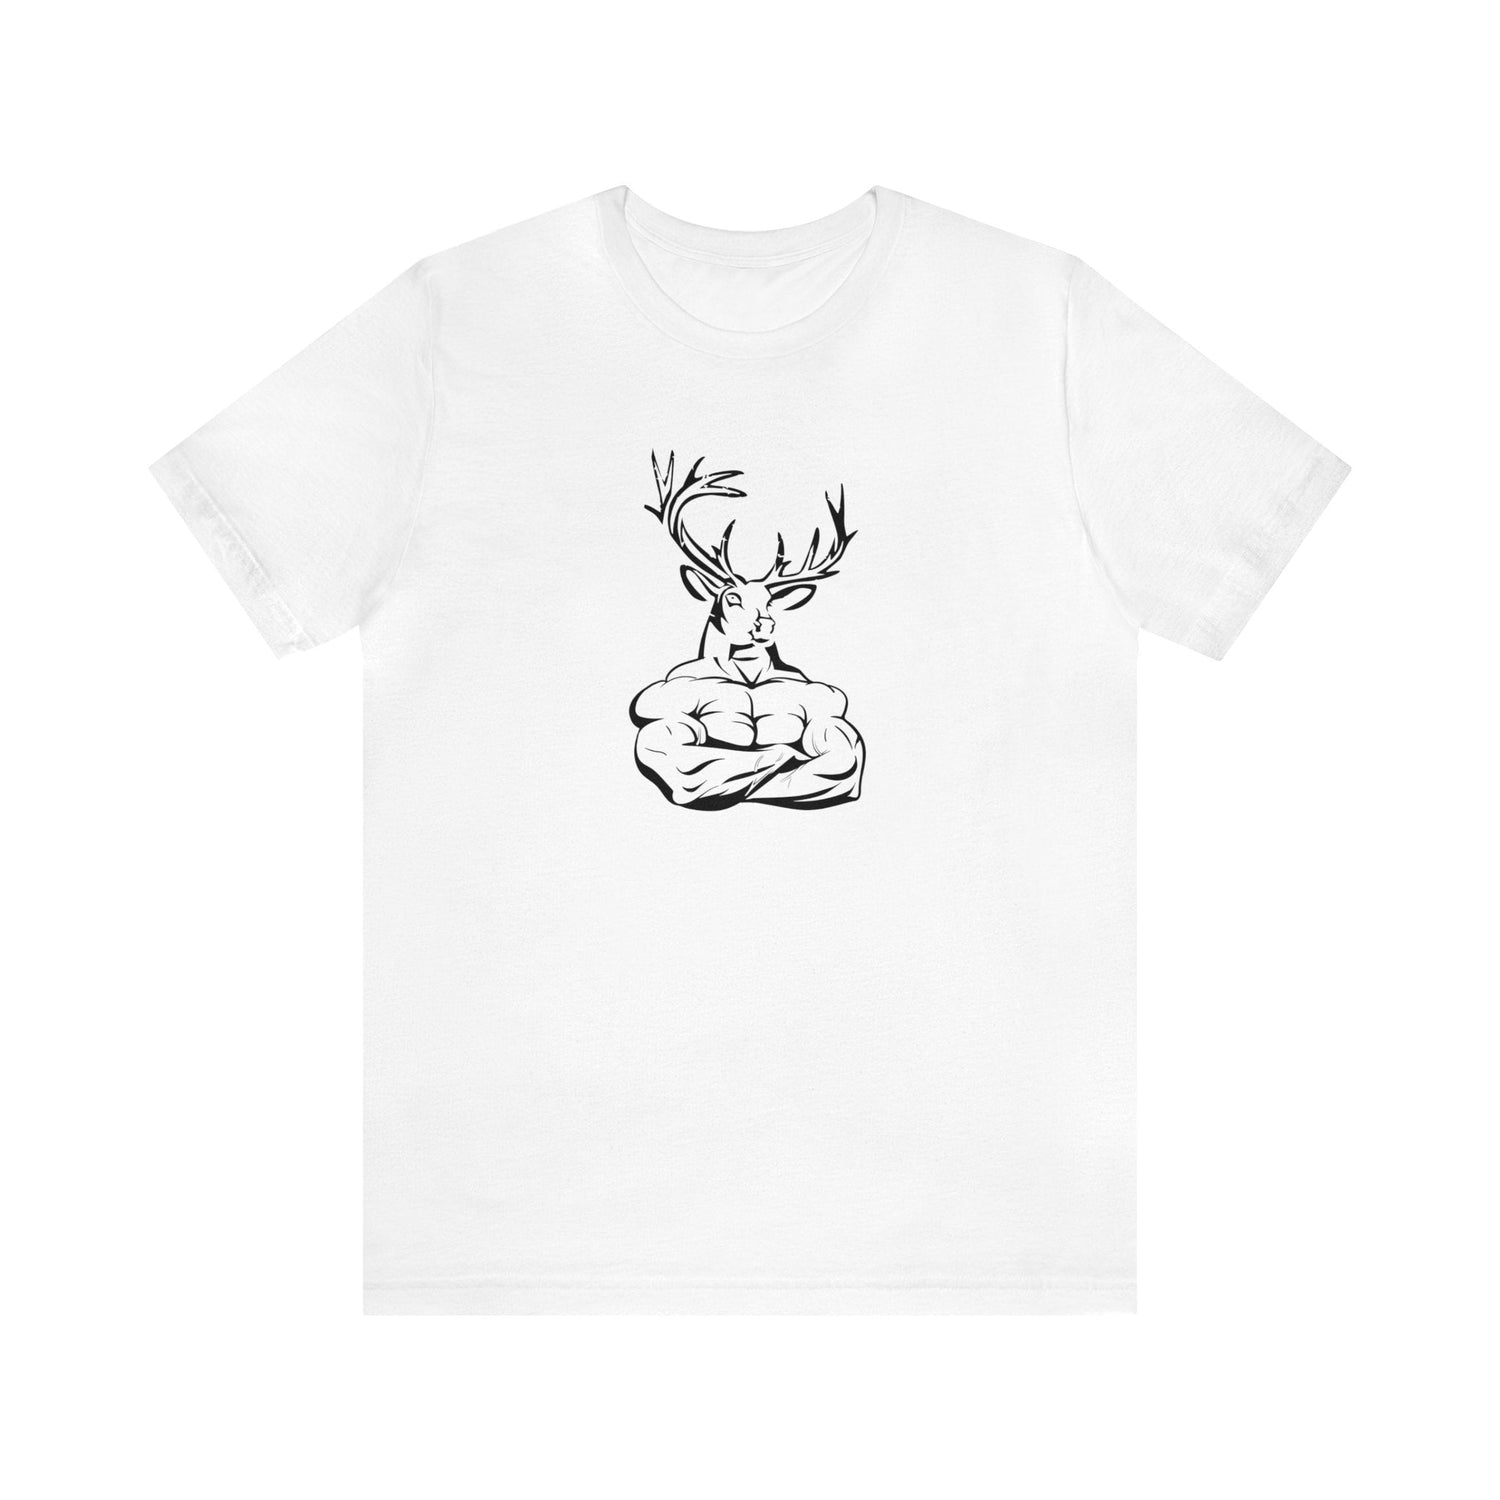 Western deer hunting t-shirt, color white, front design placement